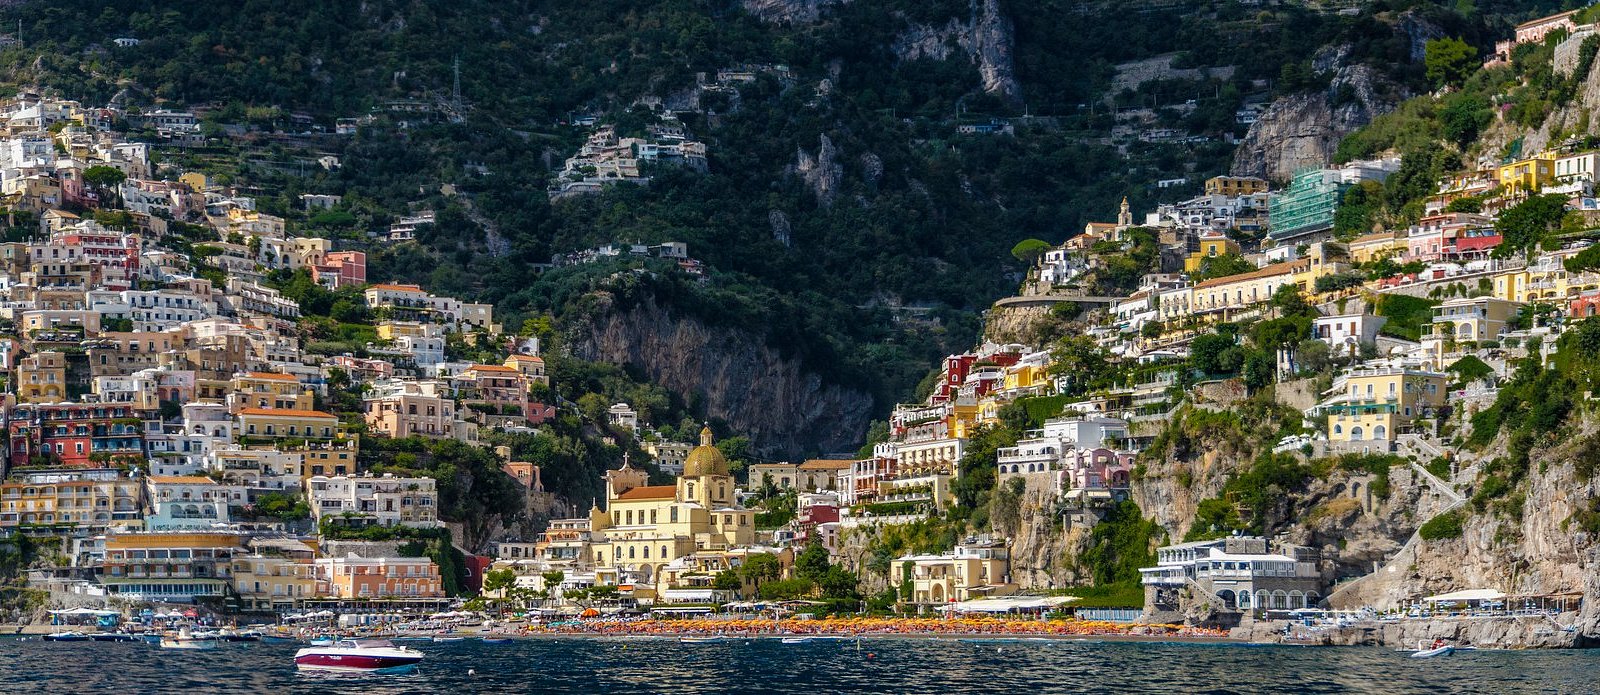 orientering Theseus lindre THE 10 BEST Downtown Positano Hotels 2023 (with Prices) - Tripadvisor